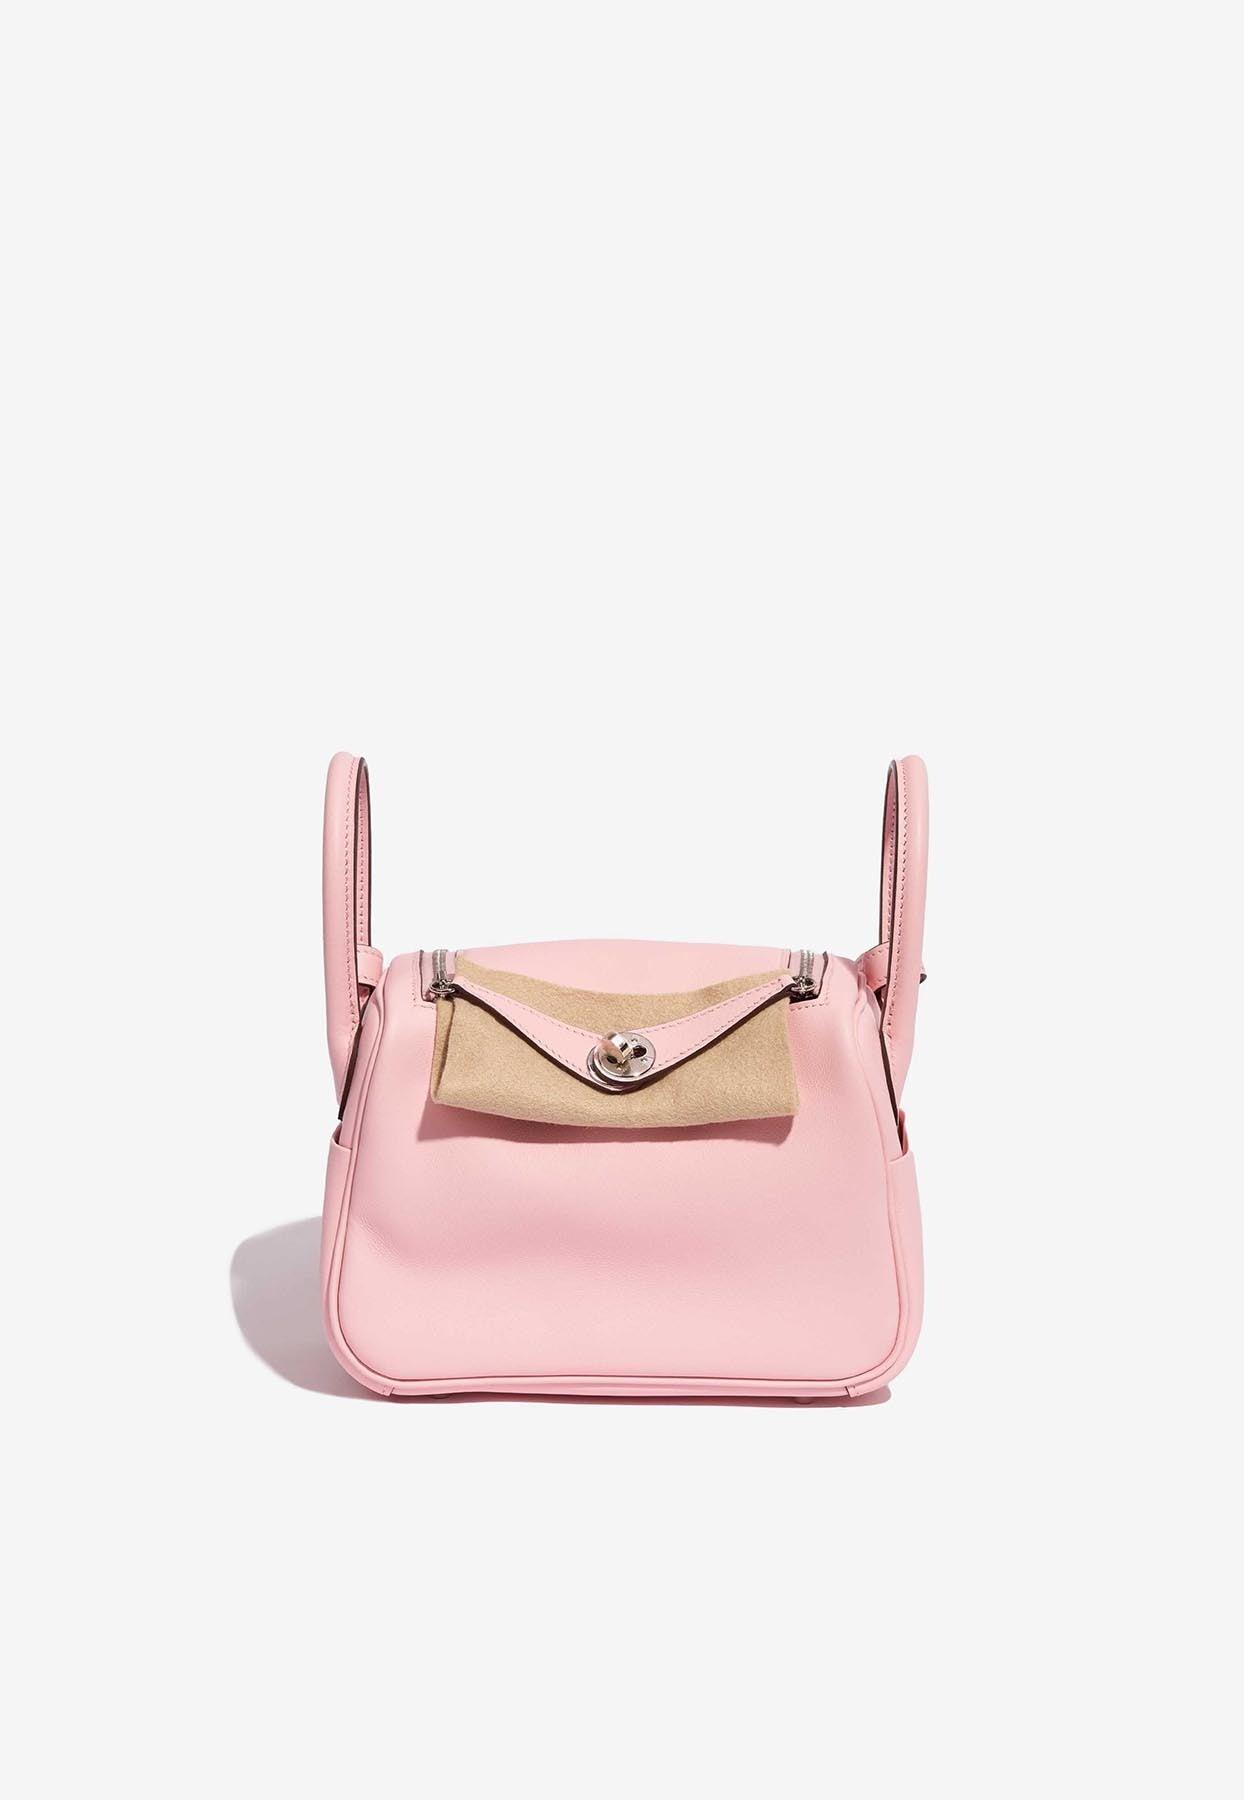 Rose Shocking Mini Lindy 20cm in Clemence Leather with Palladium Hardware,  2021, Handbags & Accessories, 2021